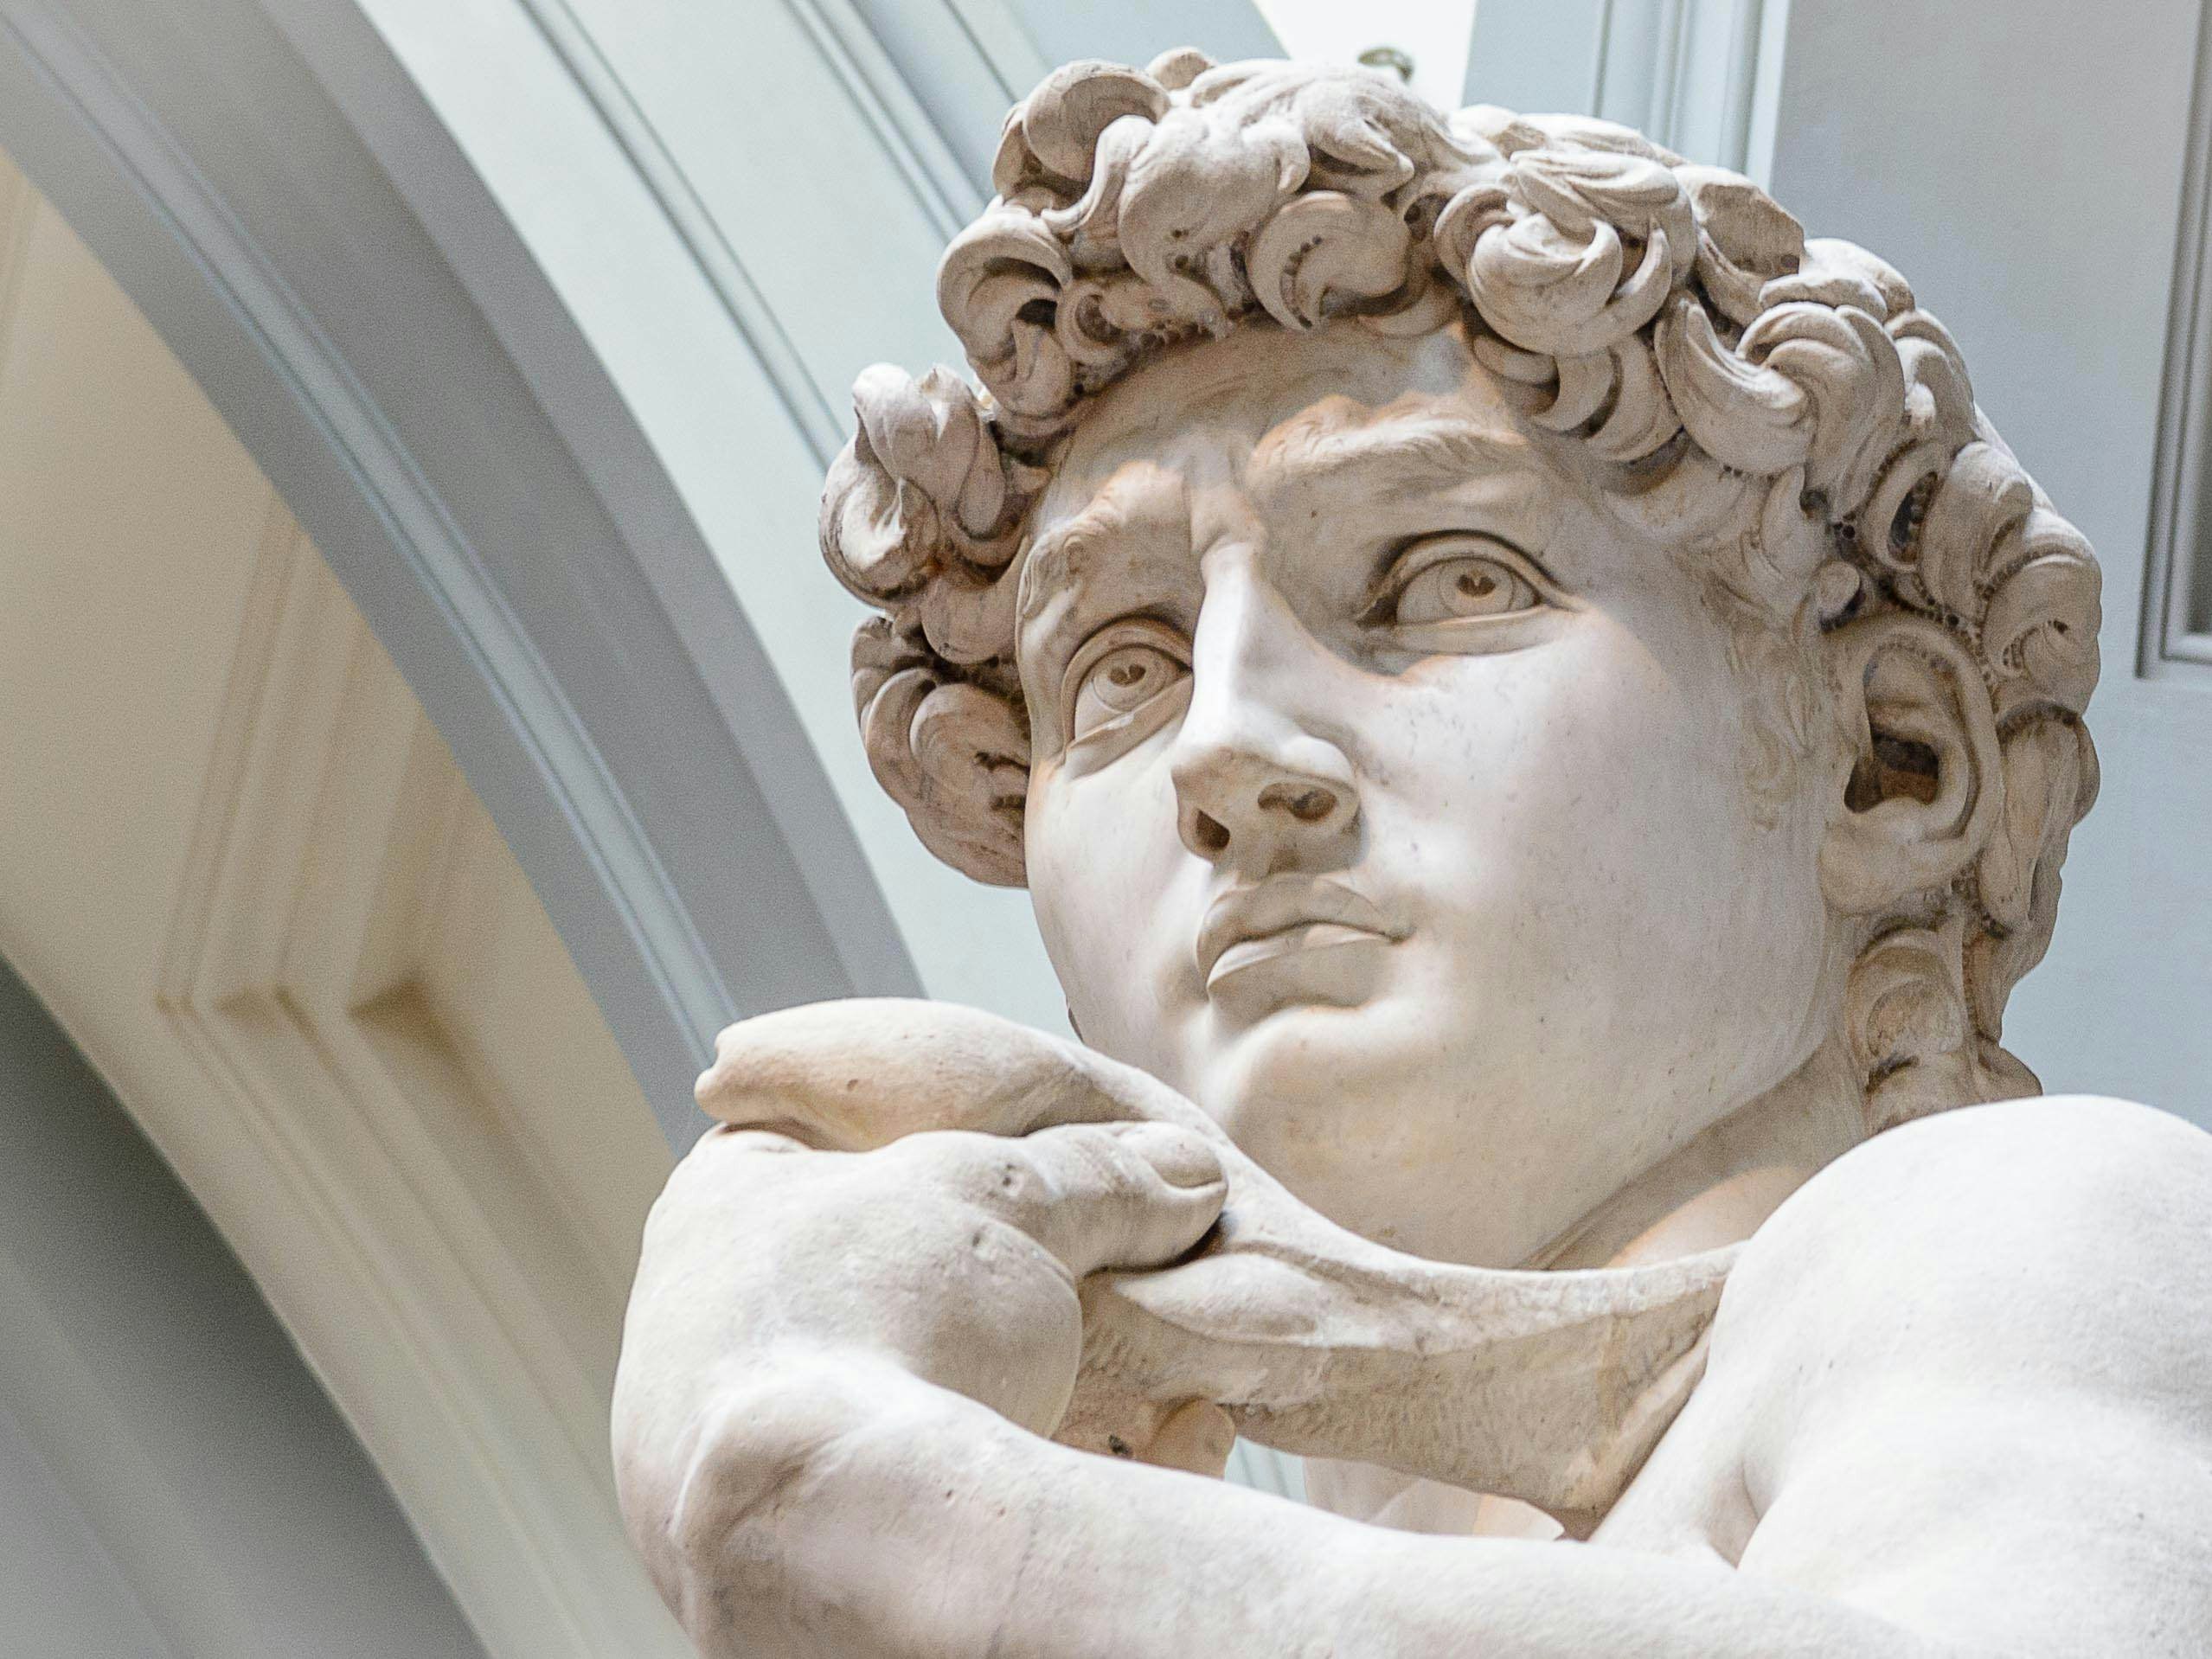 A close up shot of the face and hand of Michelangelo's David